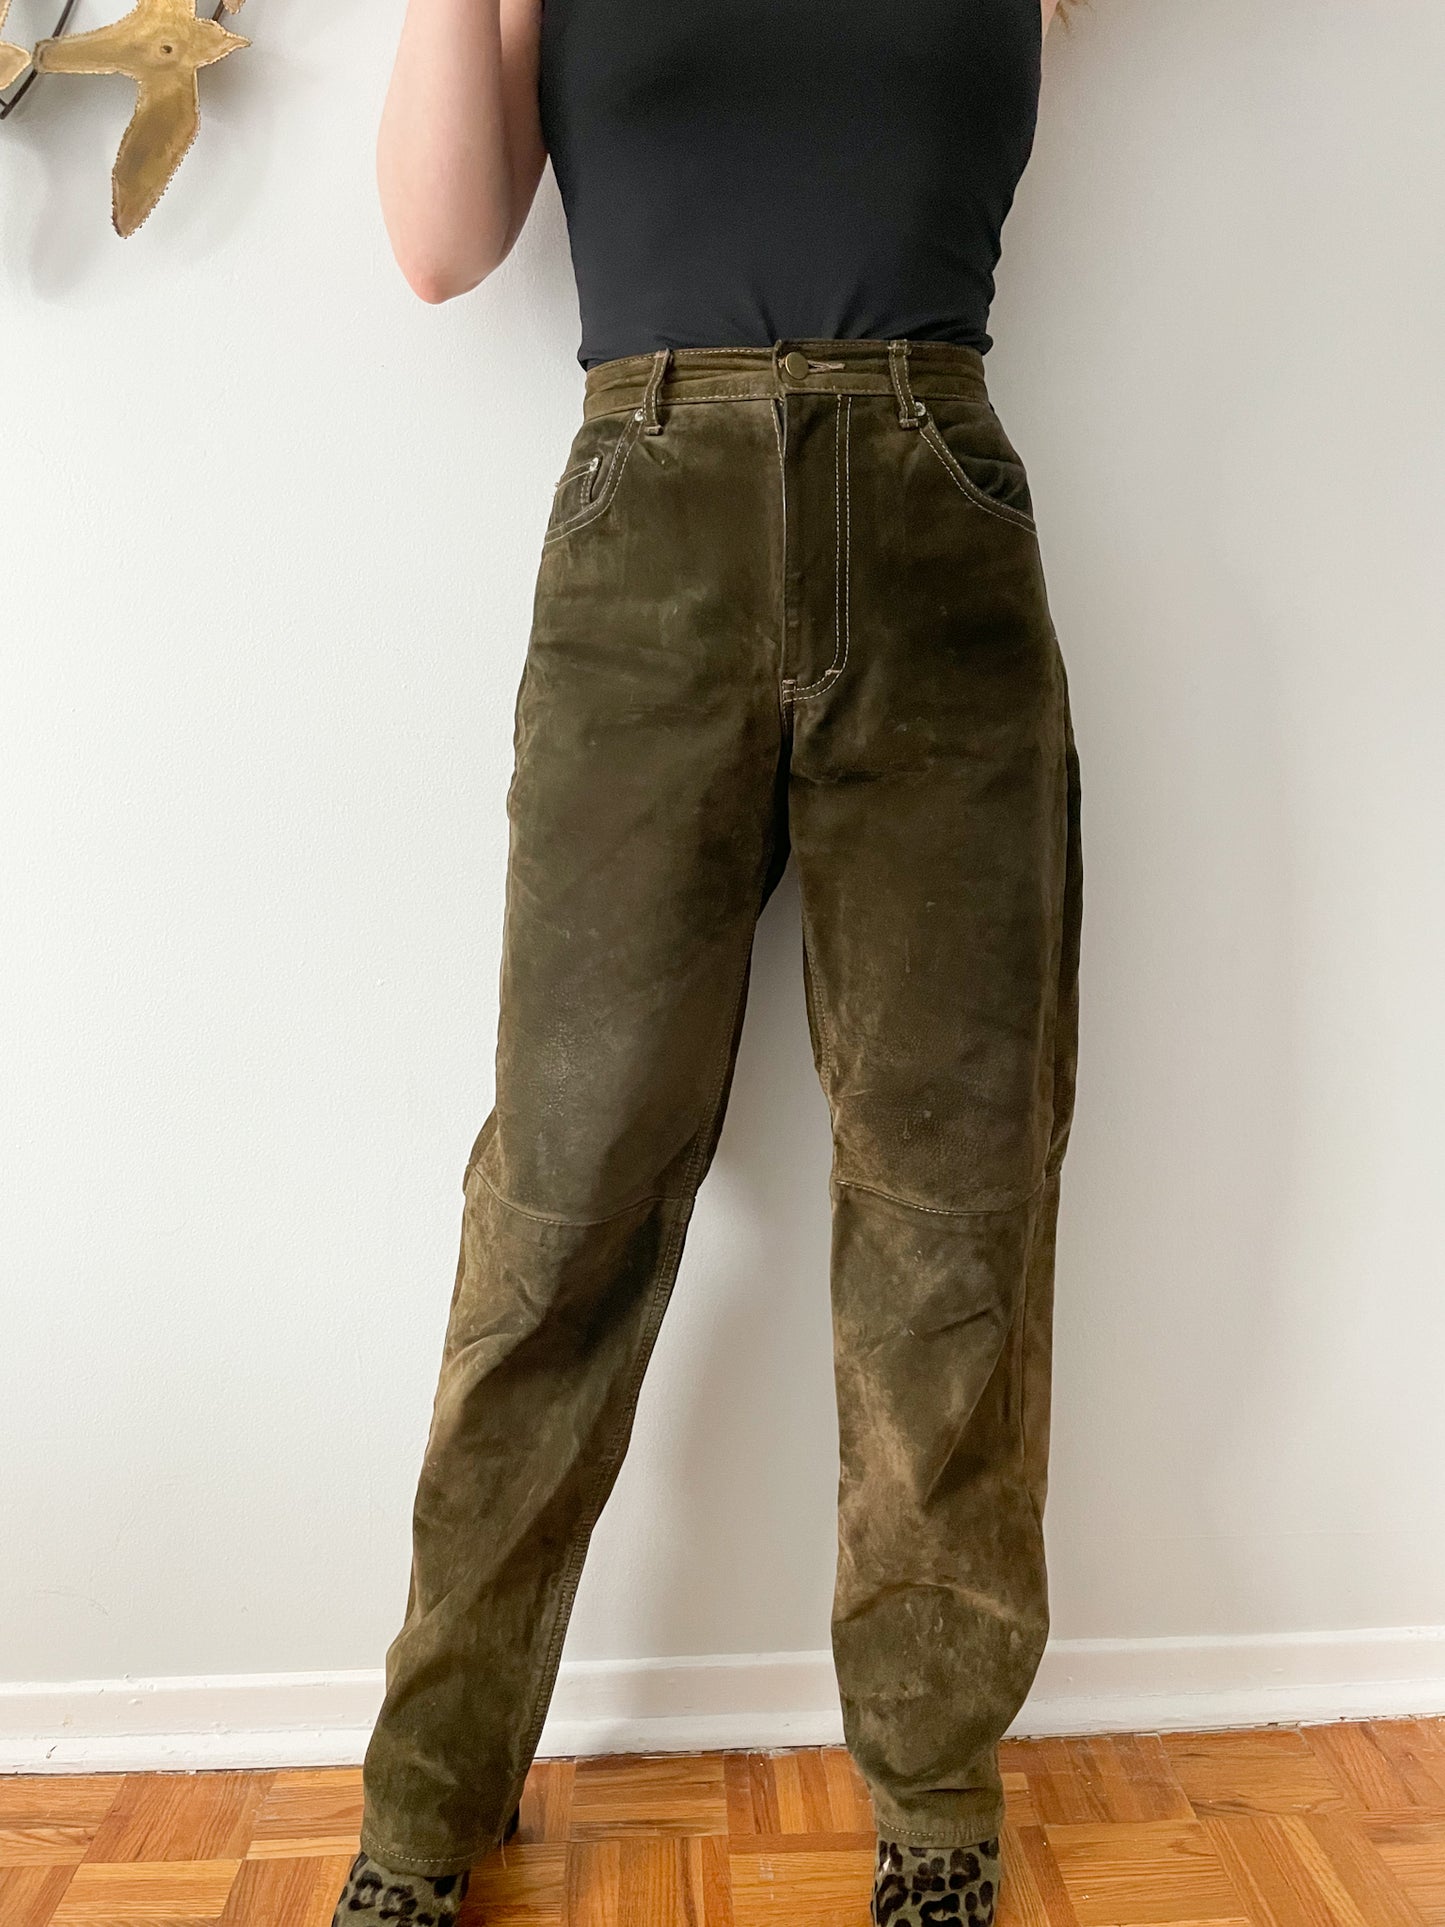 Per Suede Olive Green Genuine Suede Leather High Rise Barrel Pants - Size 28